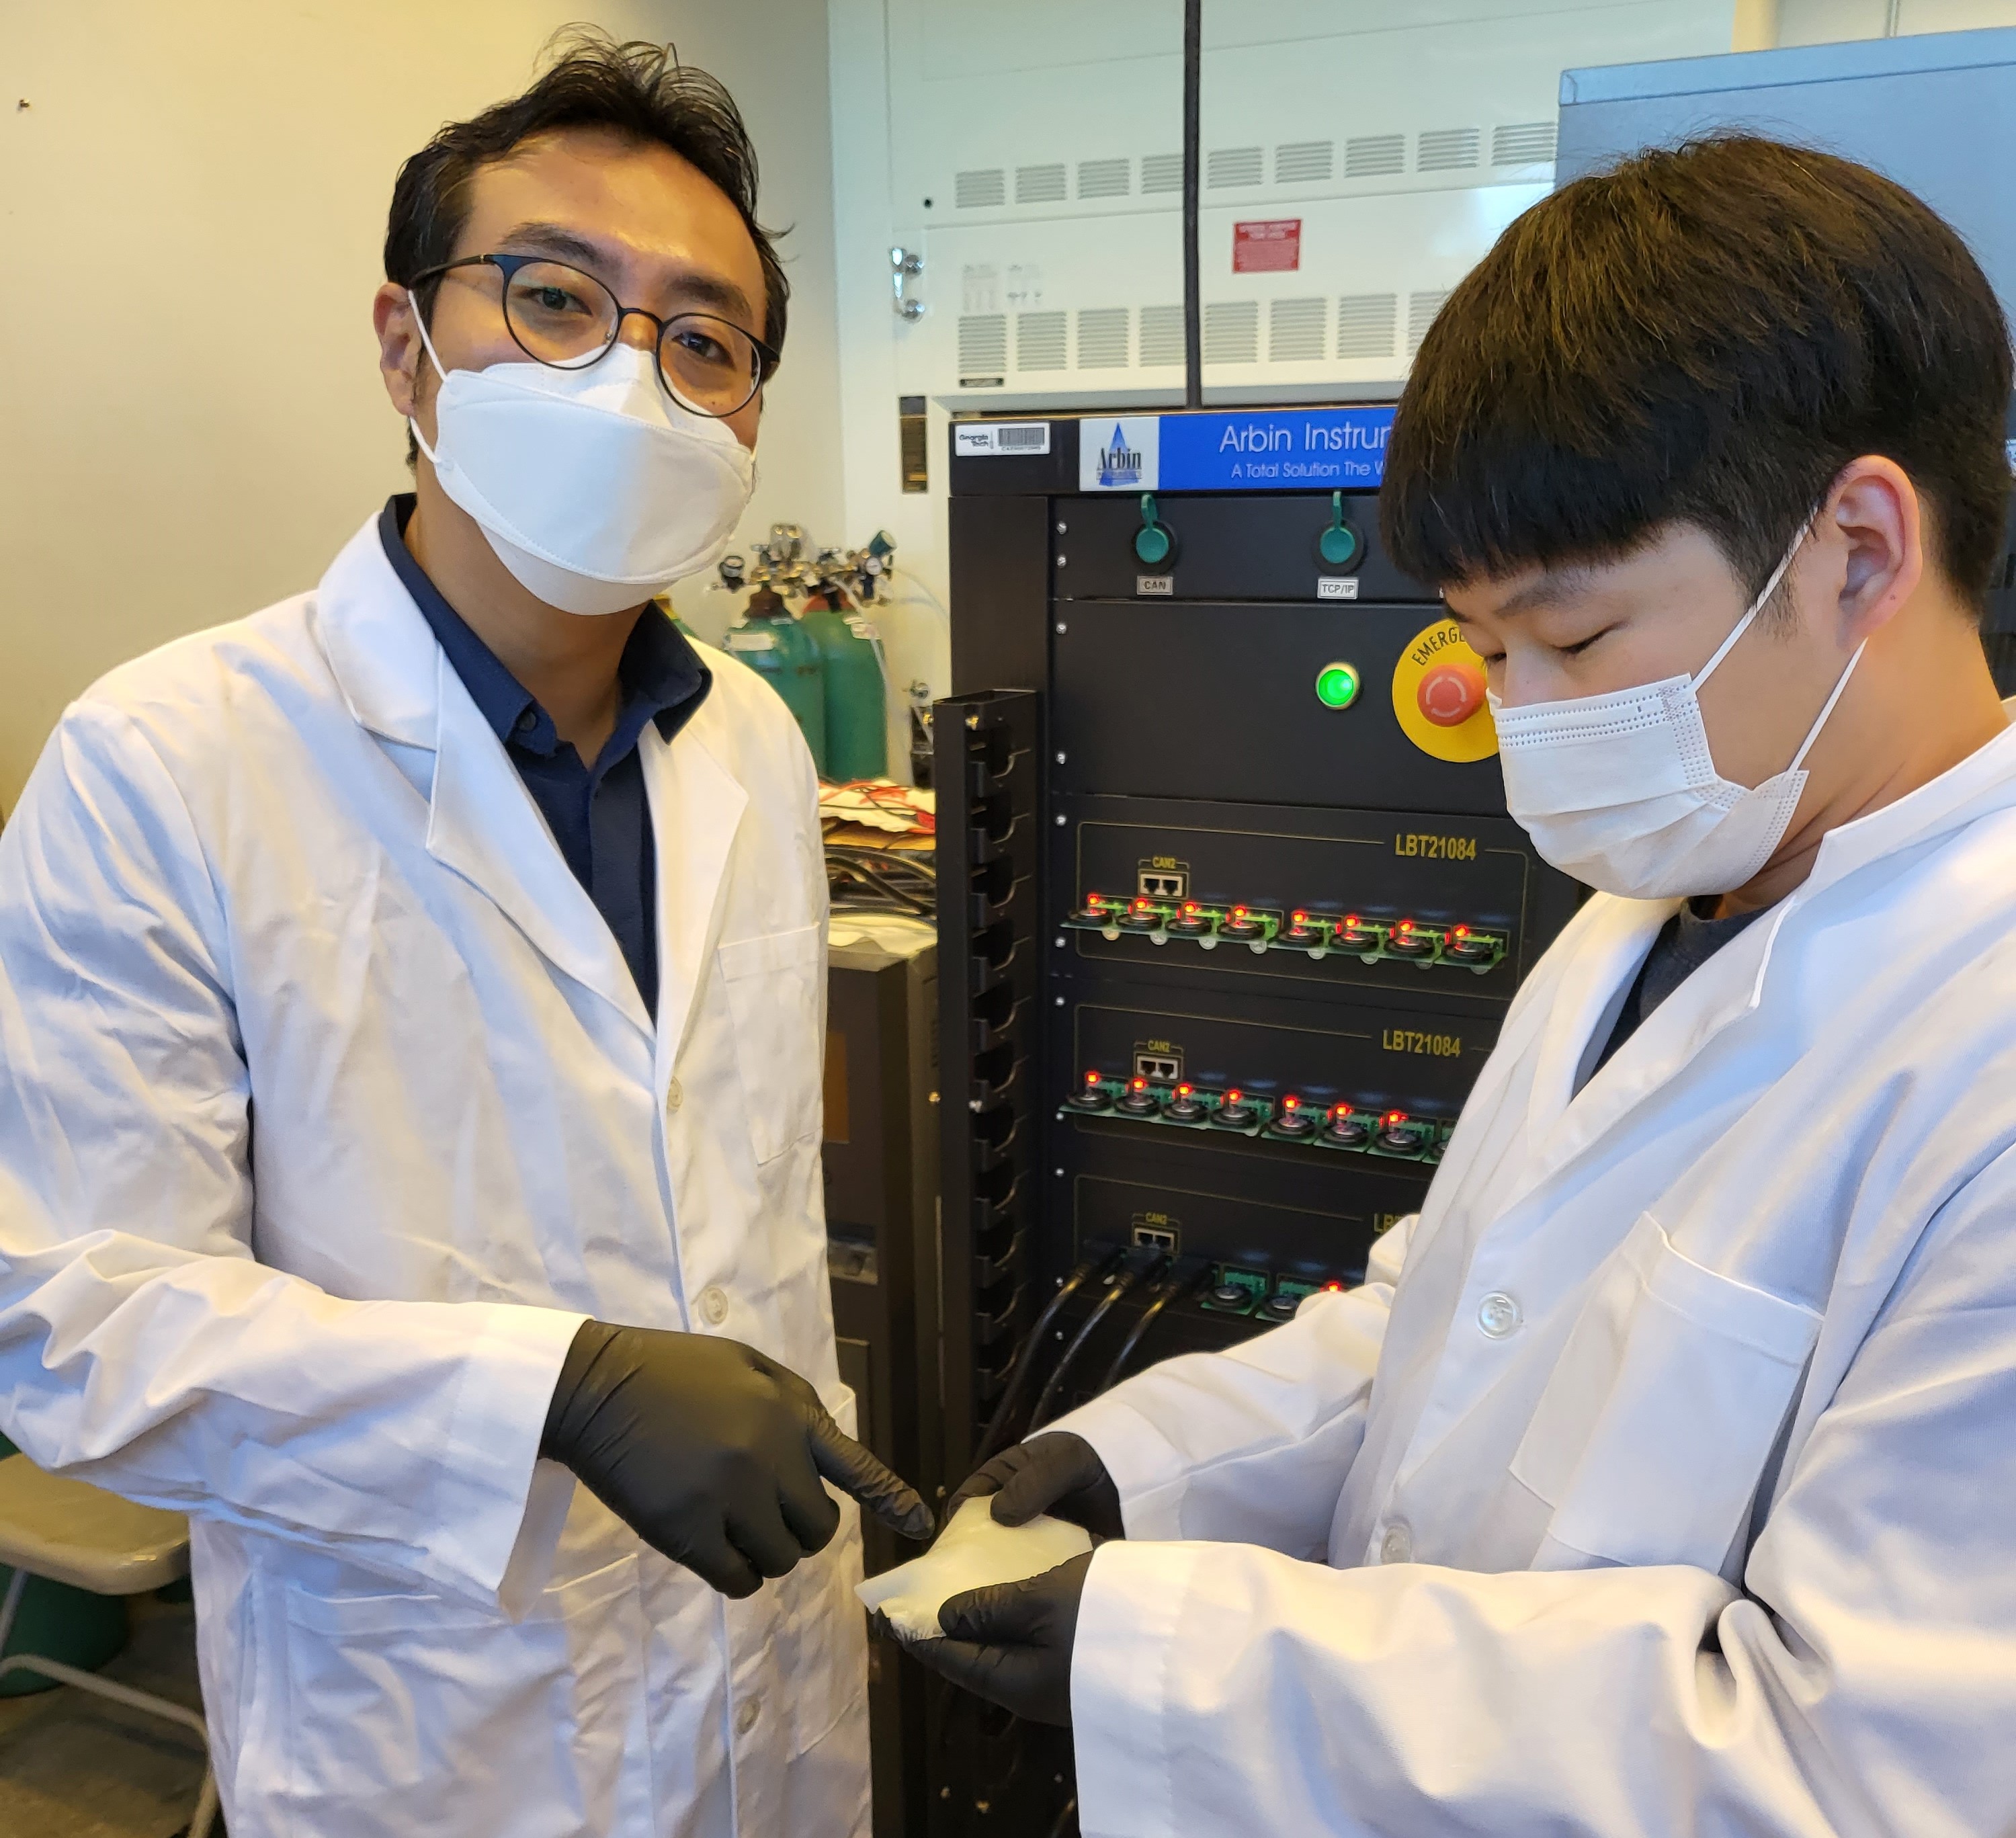 Prof. Seung Woo Lee (left) and Michael J. Lee (right) have demonstrated a more cost-effective, safer solid polymer electrolyte (rubber material) for all-solid-state batteries. (Photo credit: Georgia Tech)